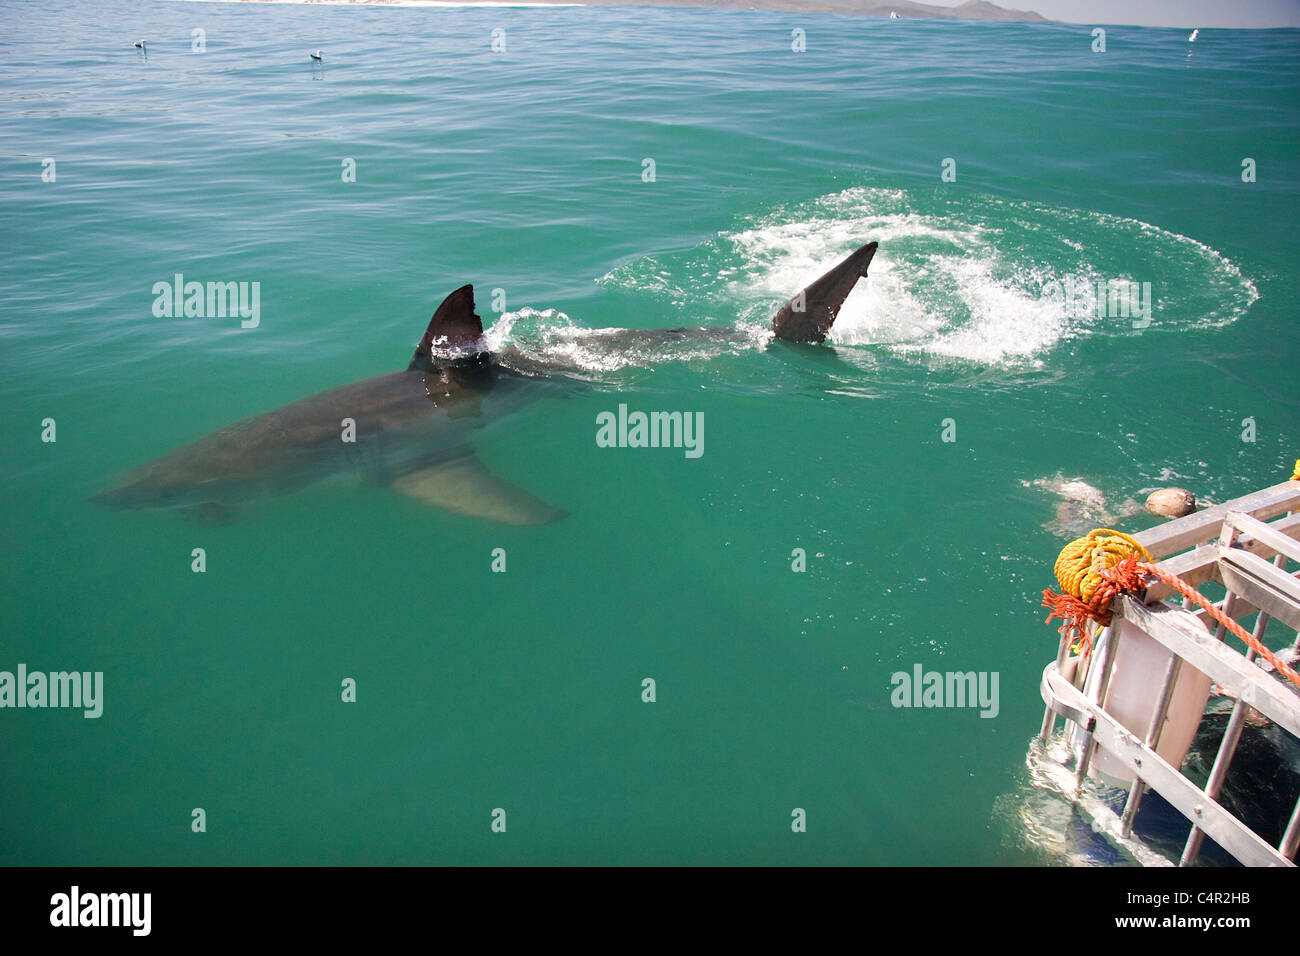 Great white shark, Mossel Bay, South Africa Stock Photo